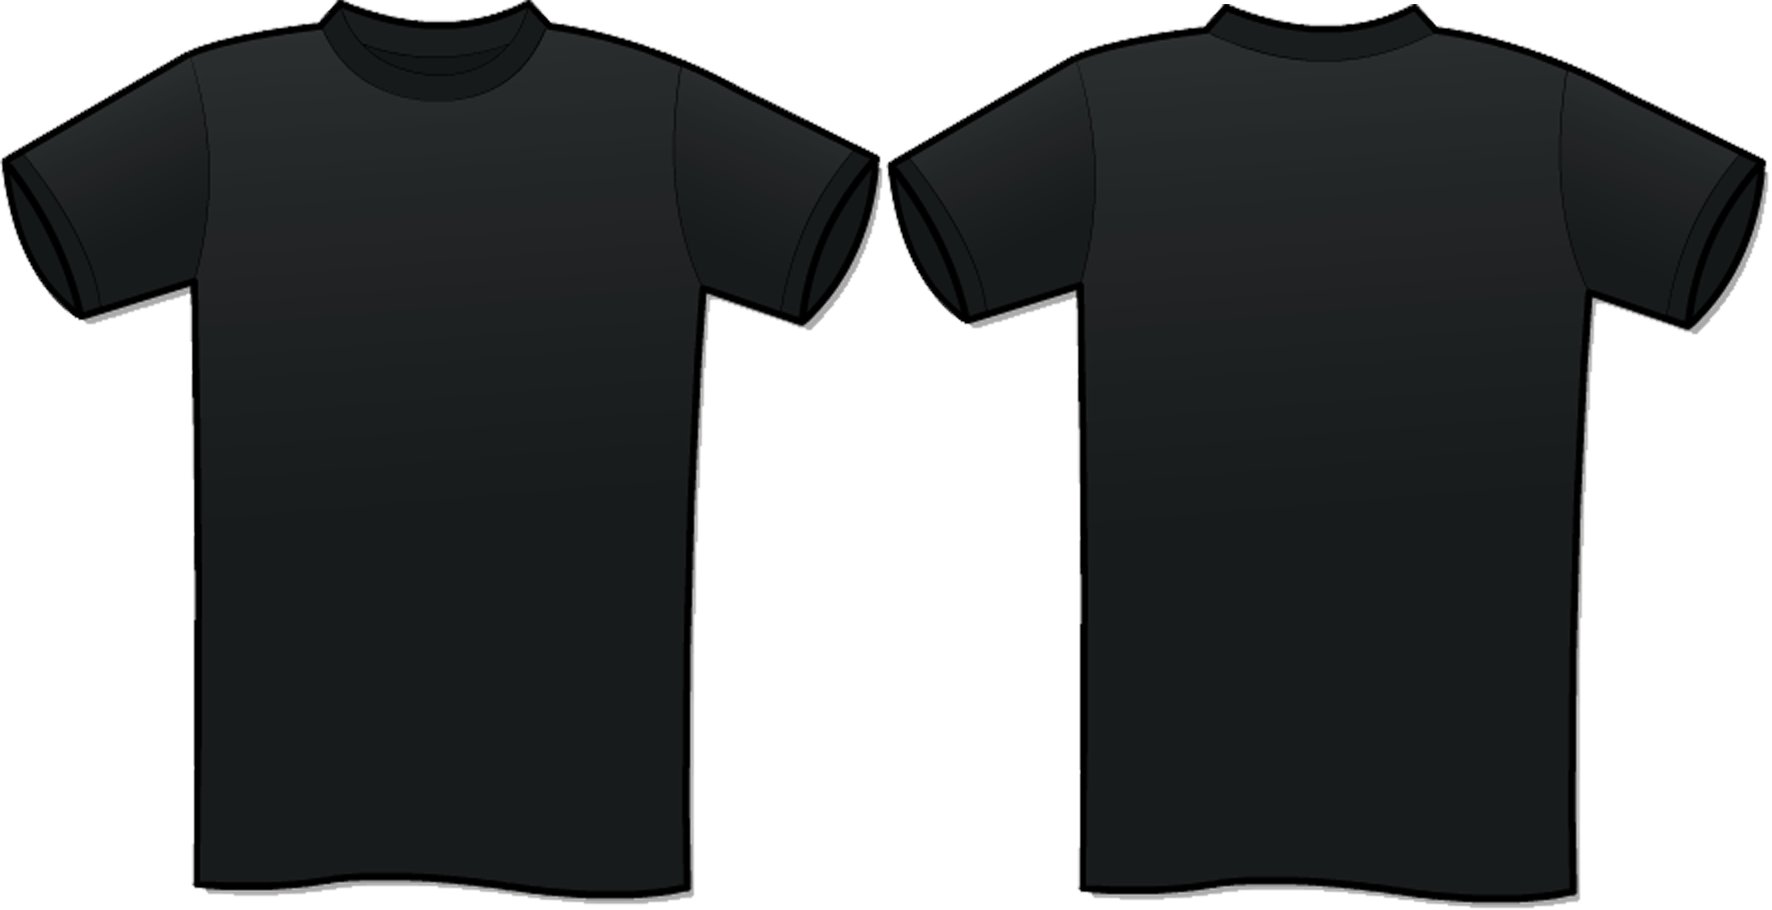 T Shirt Template: A Guide to Designing Your Own T Shirt